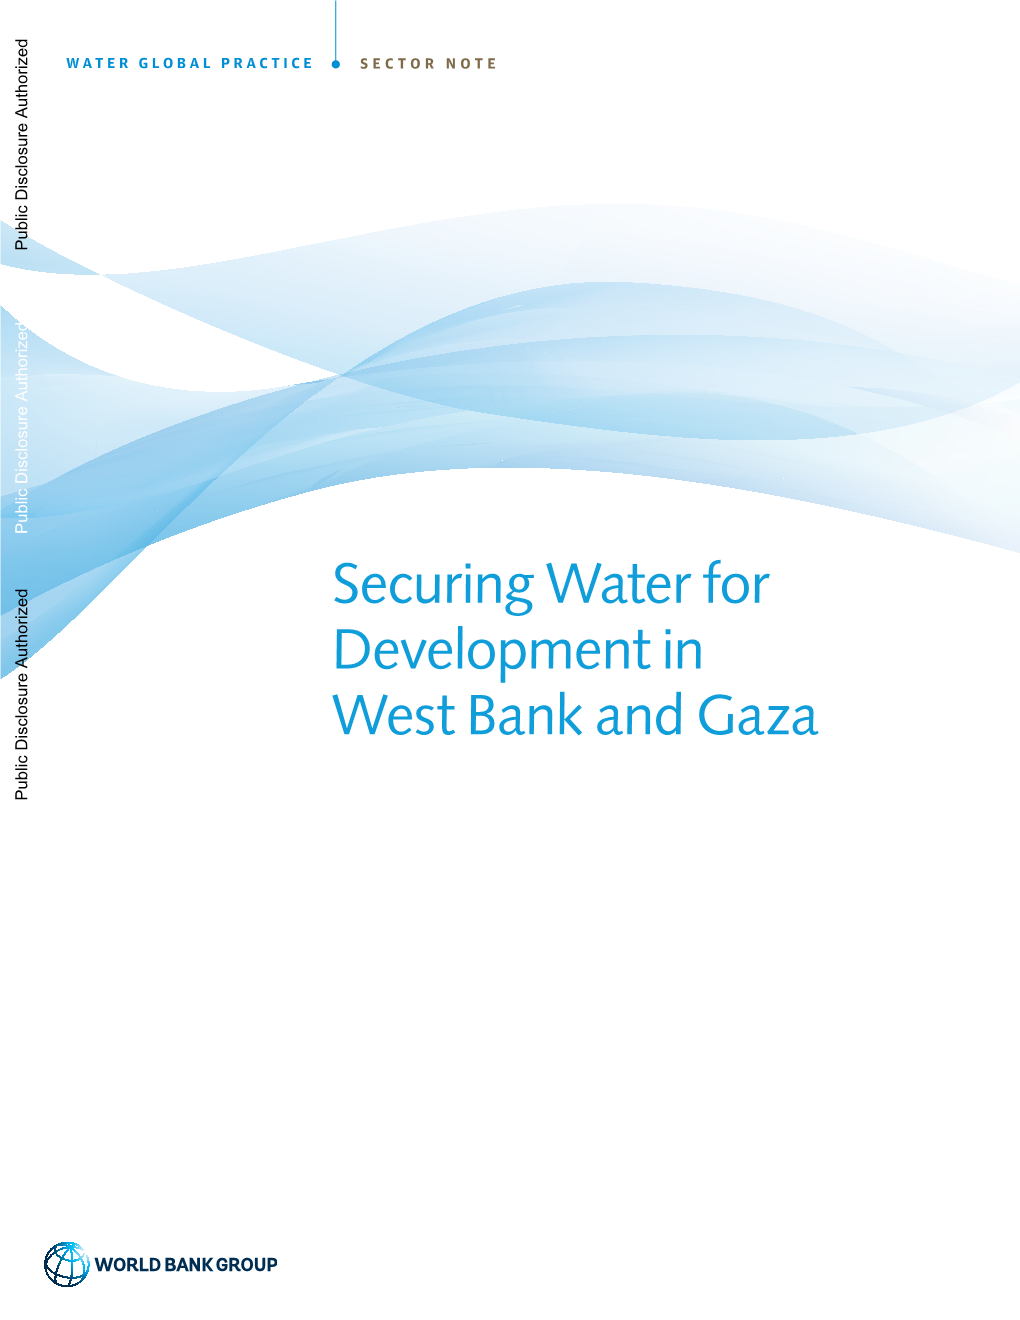 Securing Water for Development in West Bank and Gaza Public Disclosure Authorized Public Disclosure Authorized About the Water Global Practice